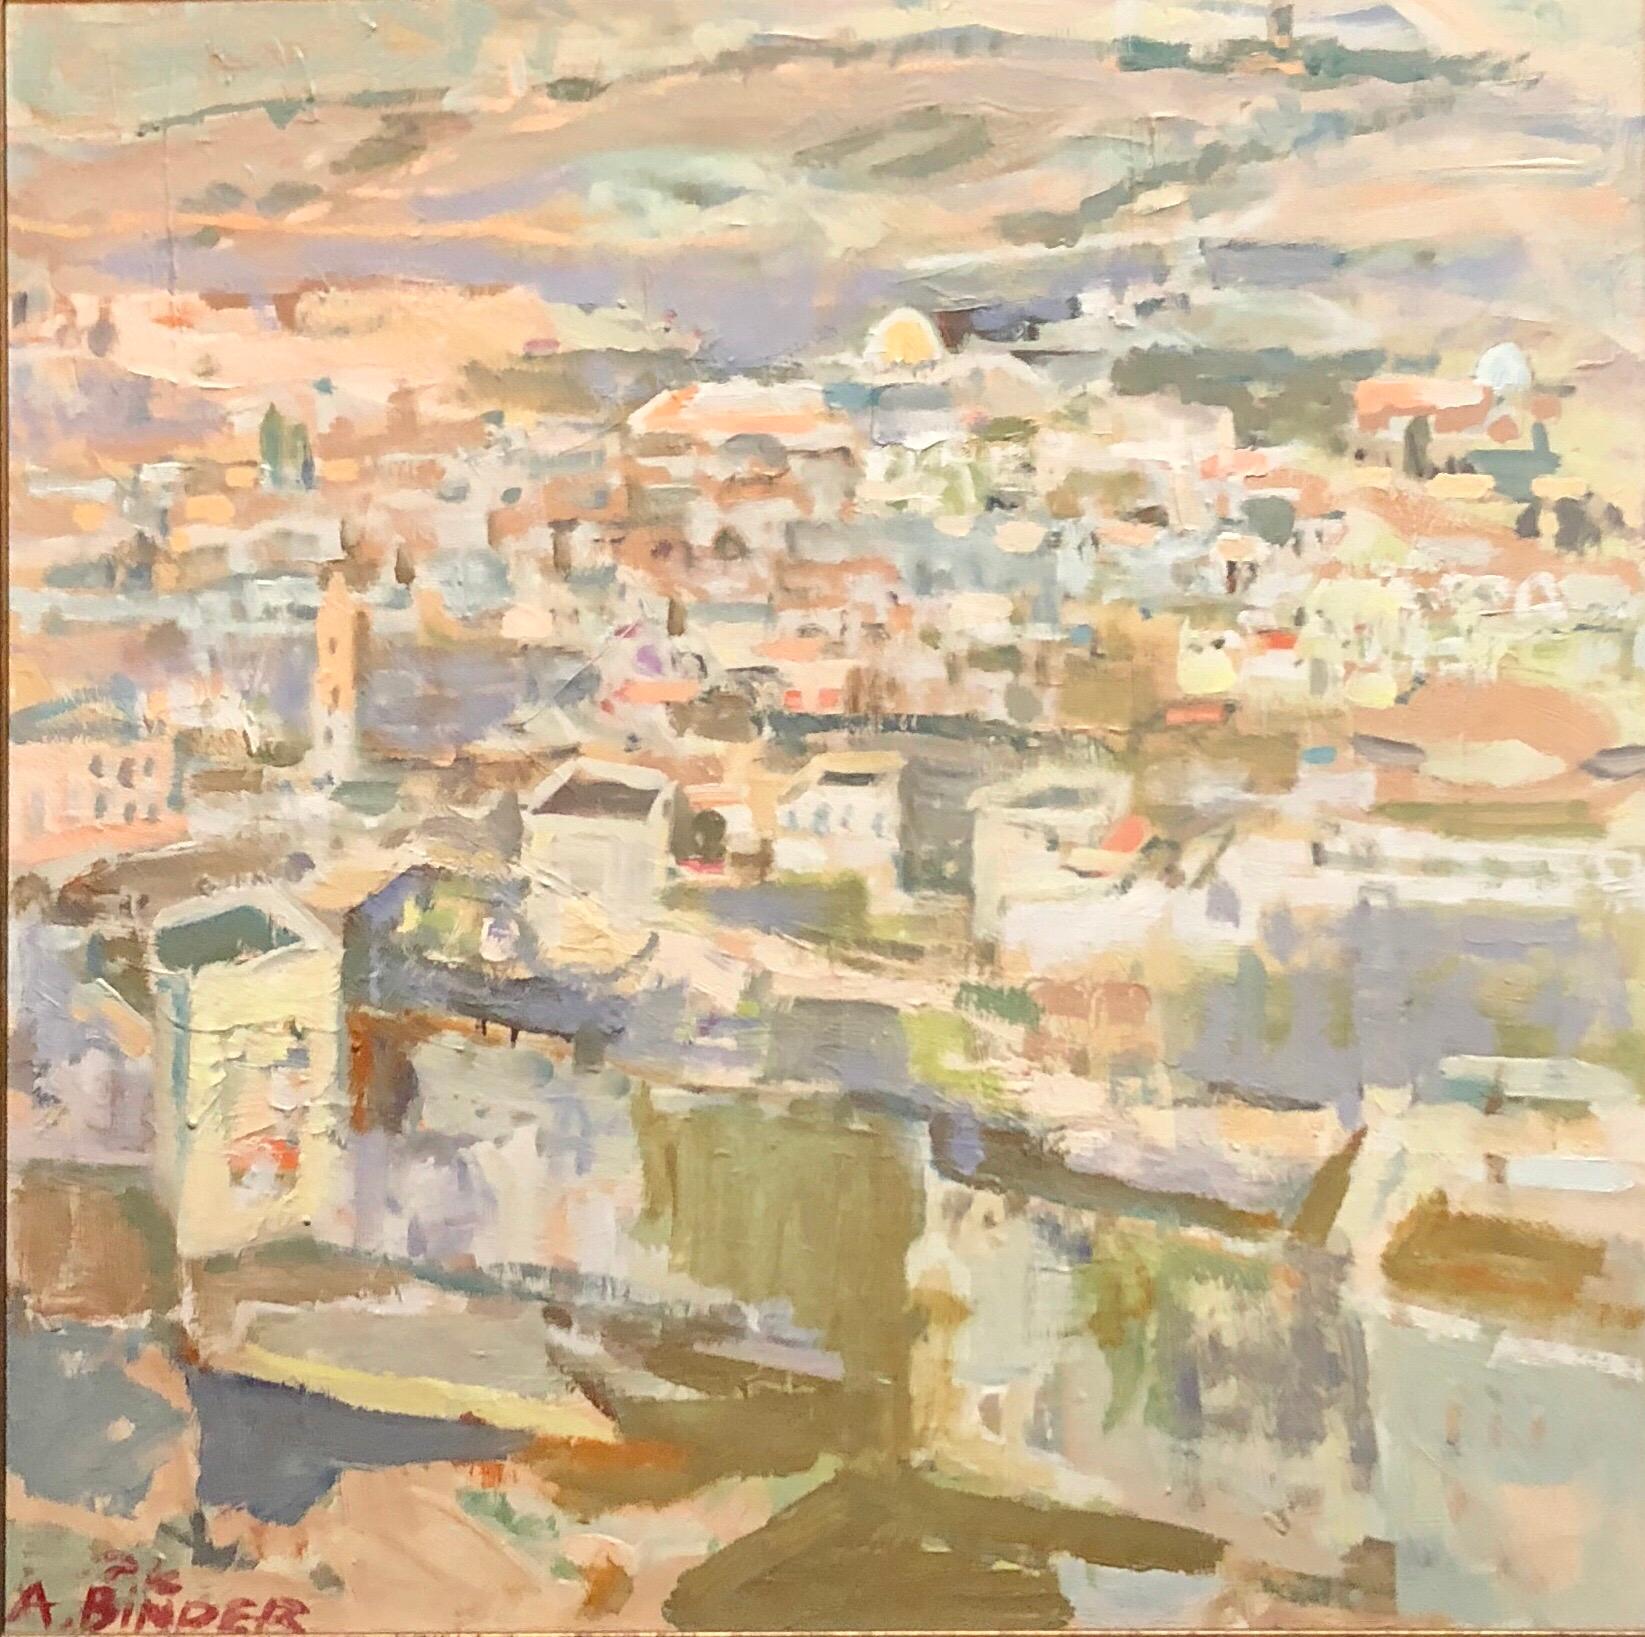 Avraham Binder was born in 1906 in Vilnius (or Vilna), now part of Lithuania. He began painting at an early age and completed the prescribed studies in painting at the academy of arts in his native city.  Upon graduation, at the commencement